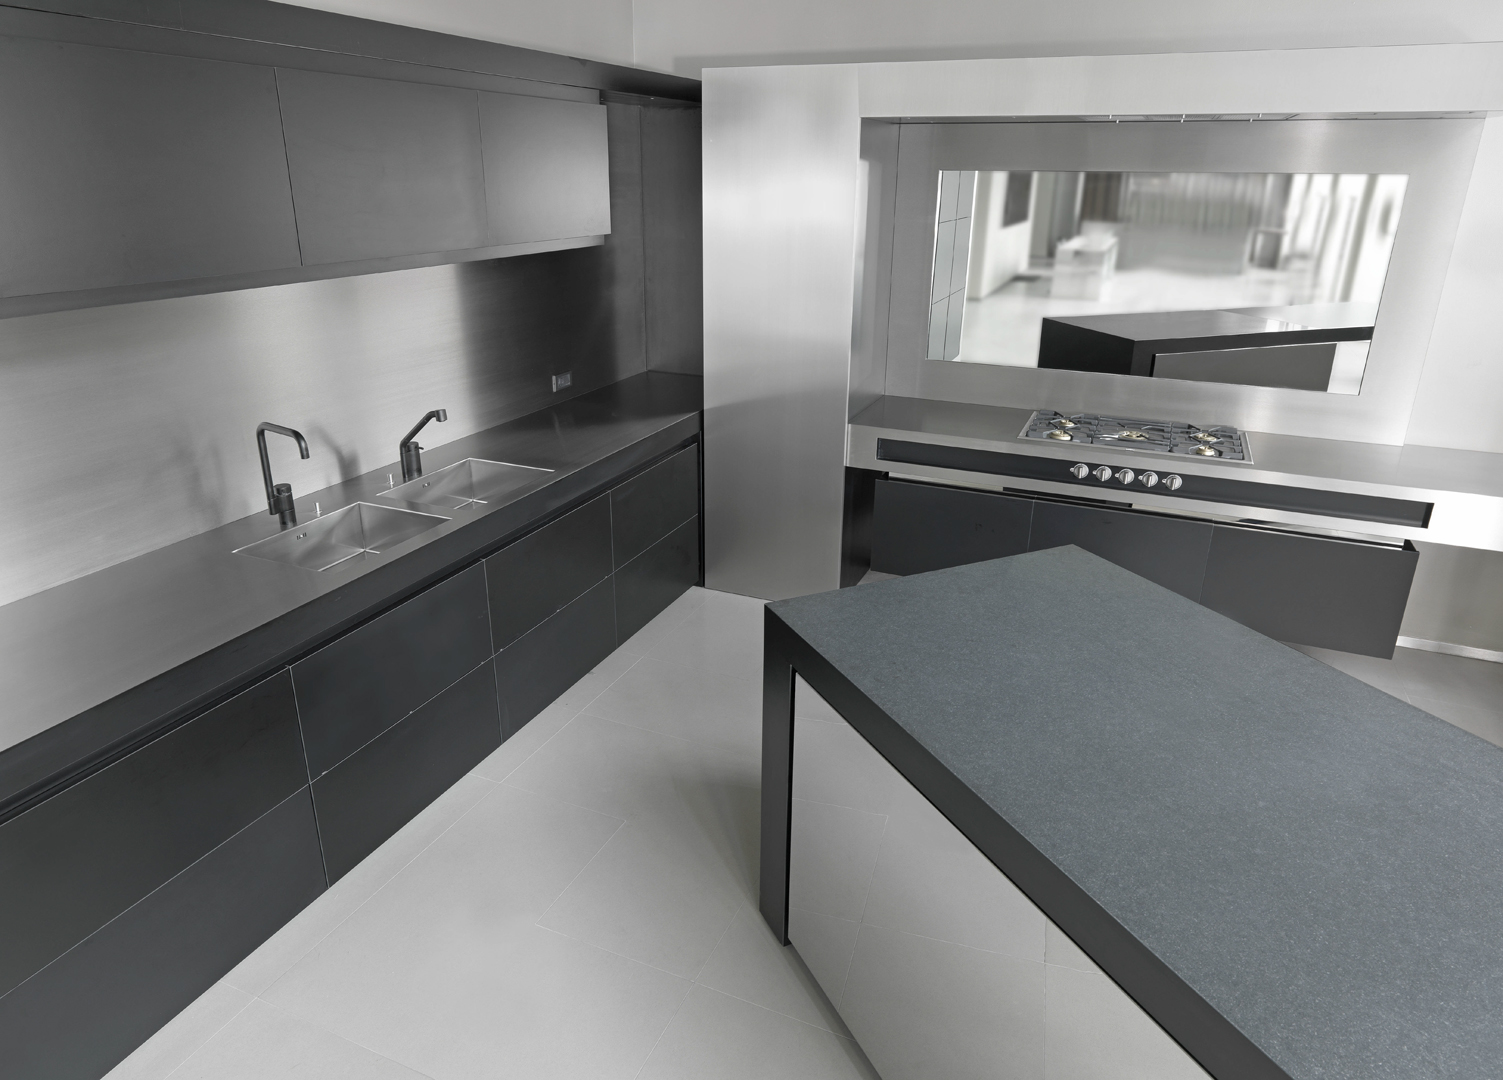 Strato_design_Non-Plus-Ultra_bespoke-kitchen-project-in-Milano-with-turning-kitchen-island_Stratocolor-black_stone_mat-and-mirror-stainless-steel_2009_04